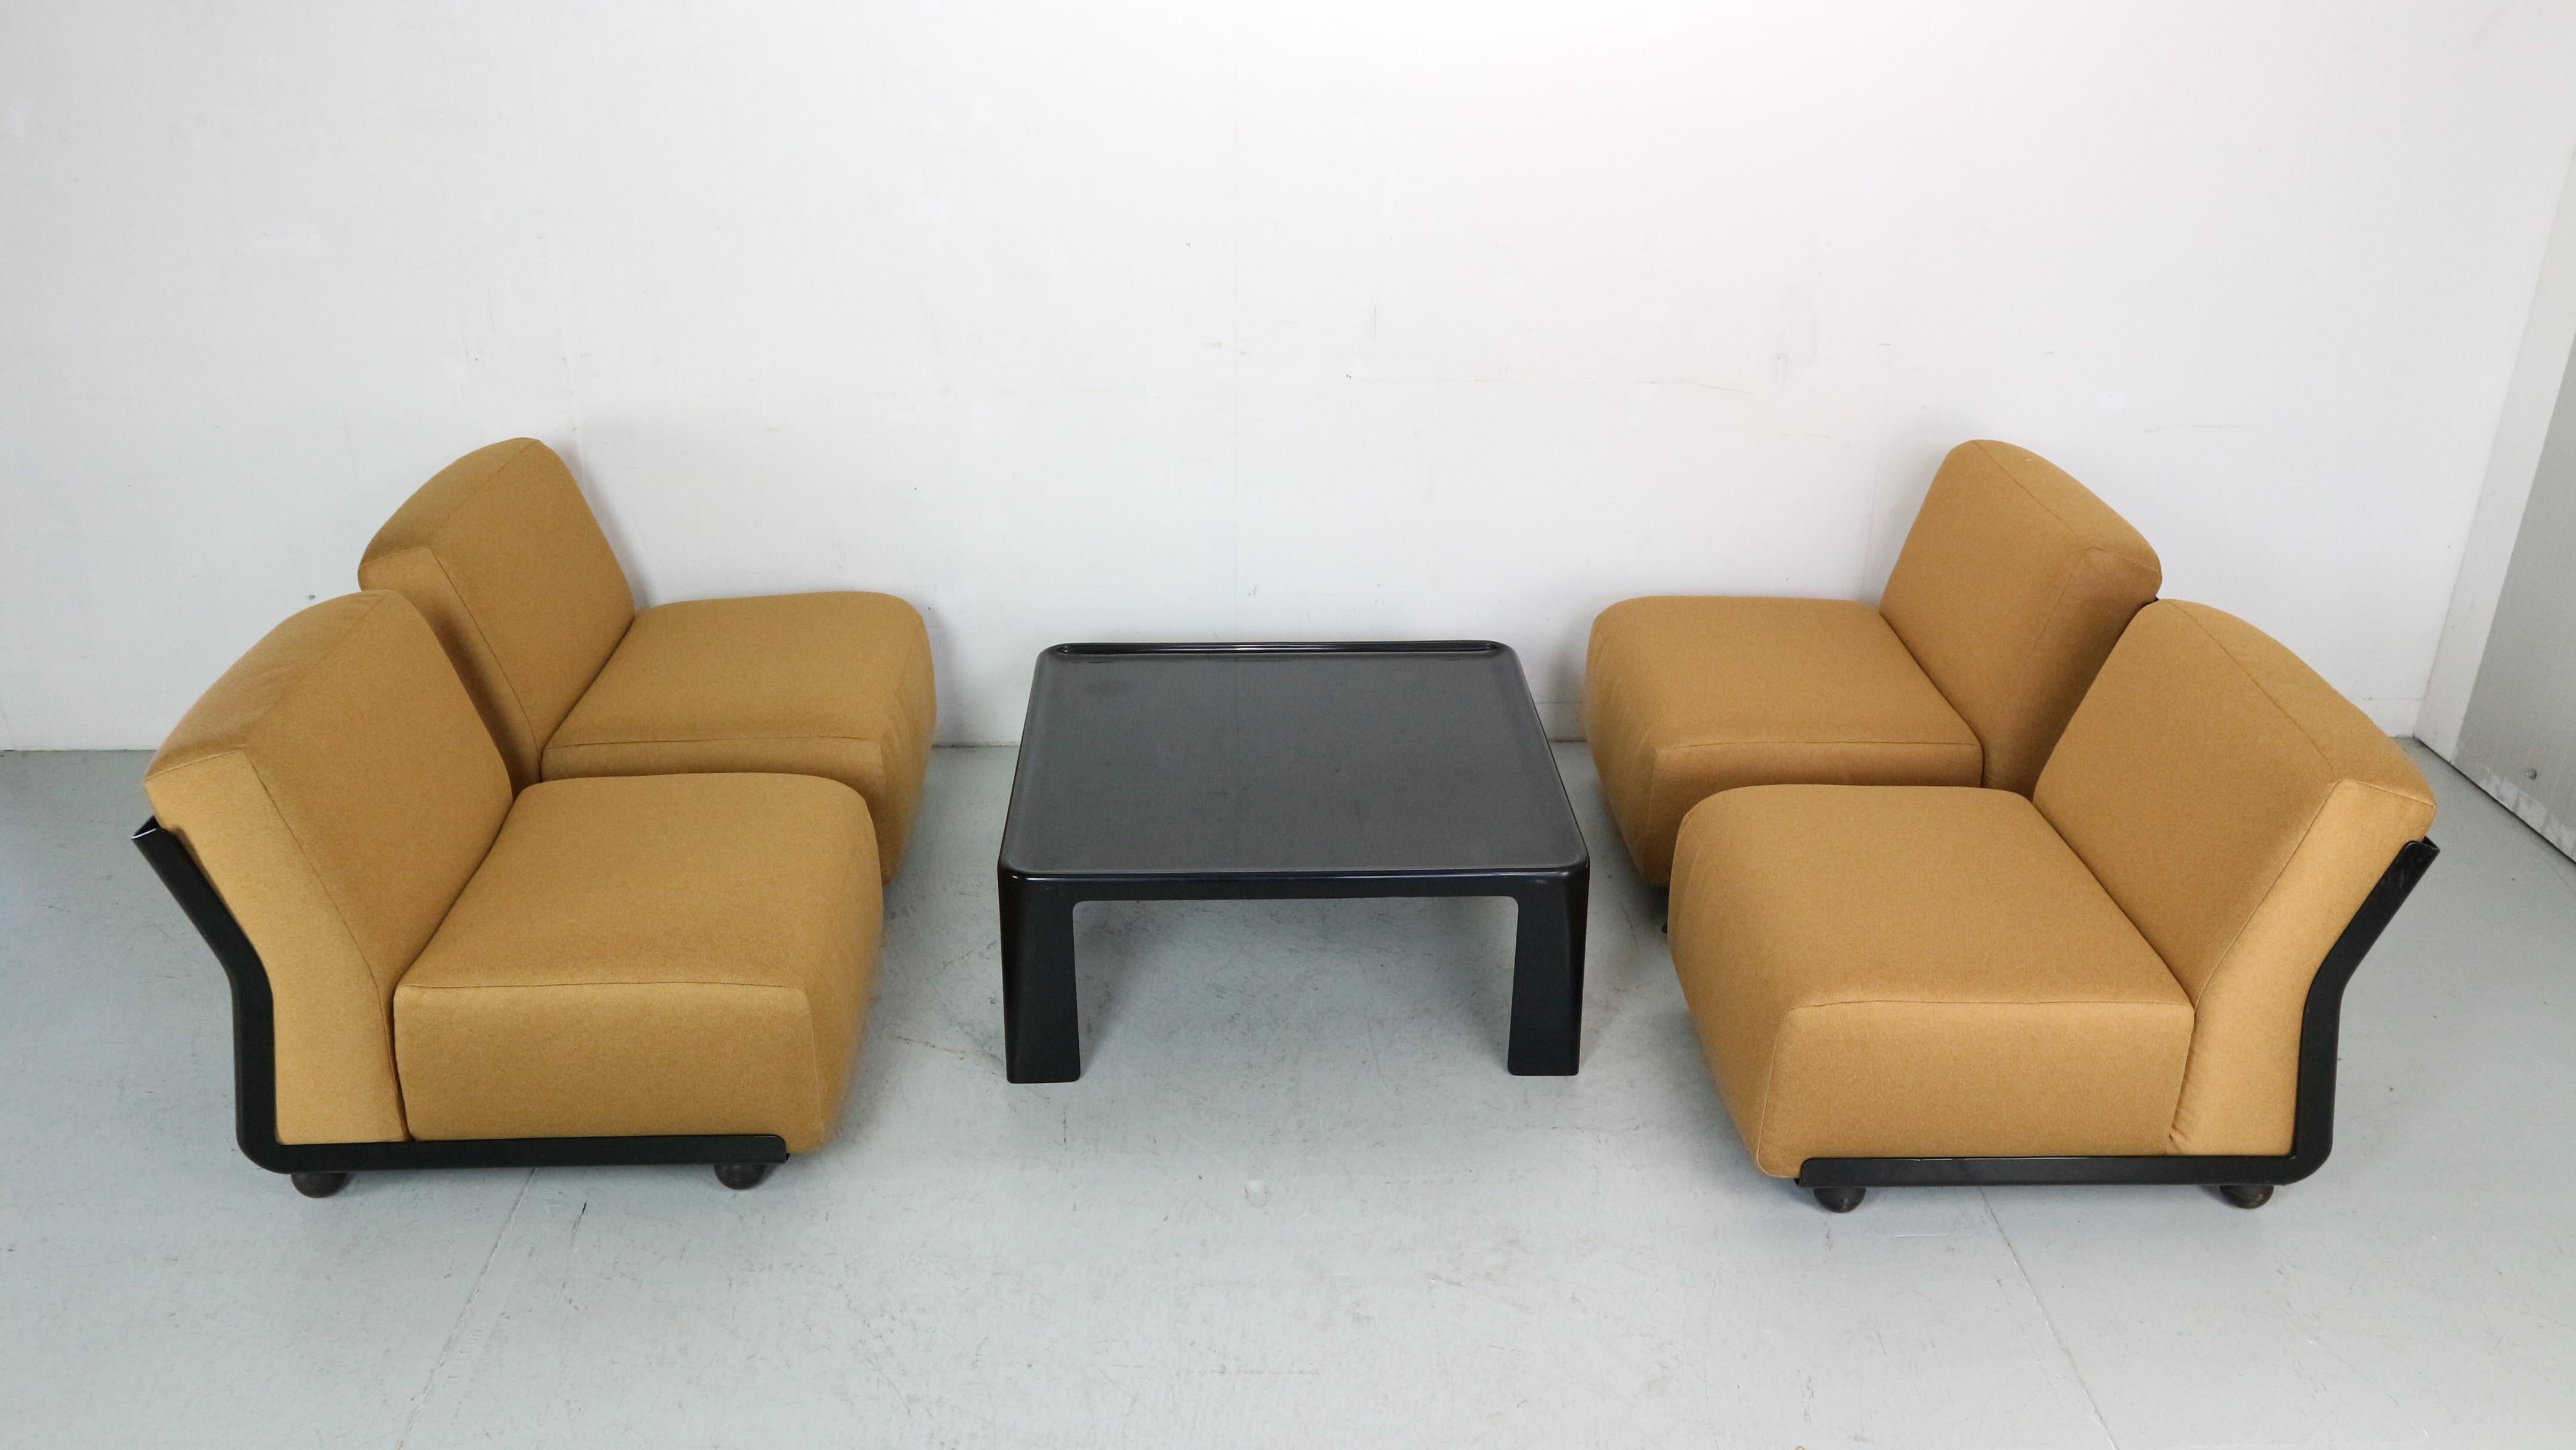 20th Century Italian Amanta 24 Chairs by Mario Bellini for C&B, 1970s For Sale